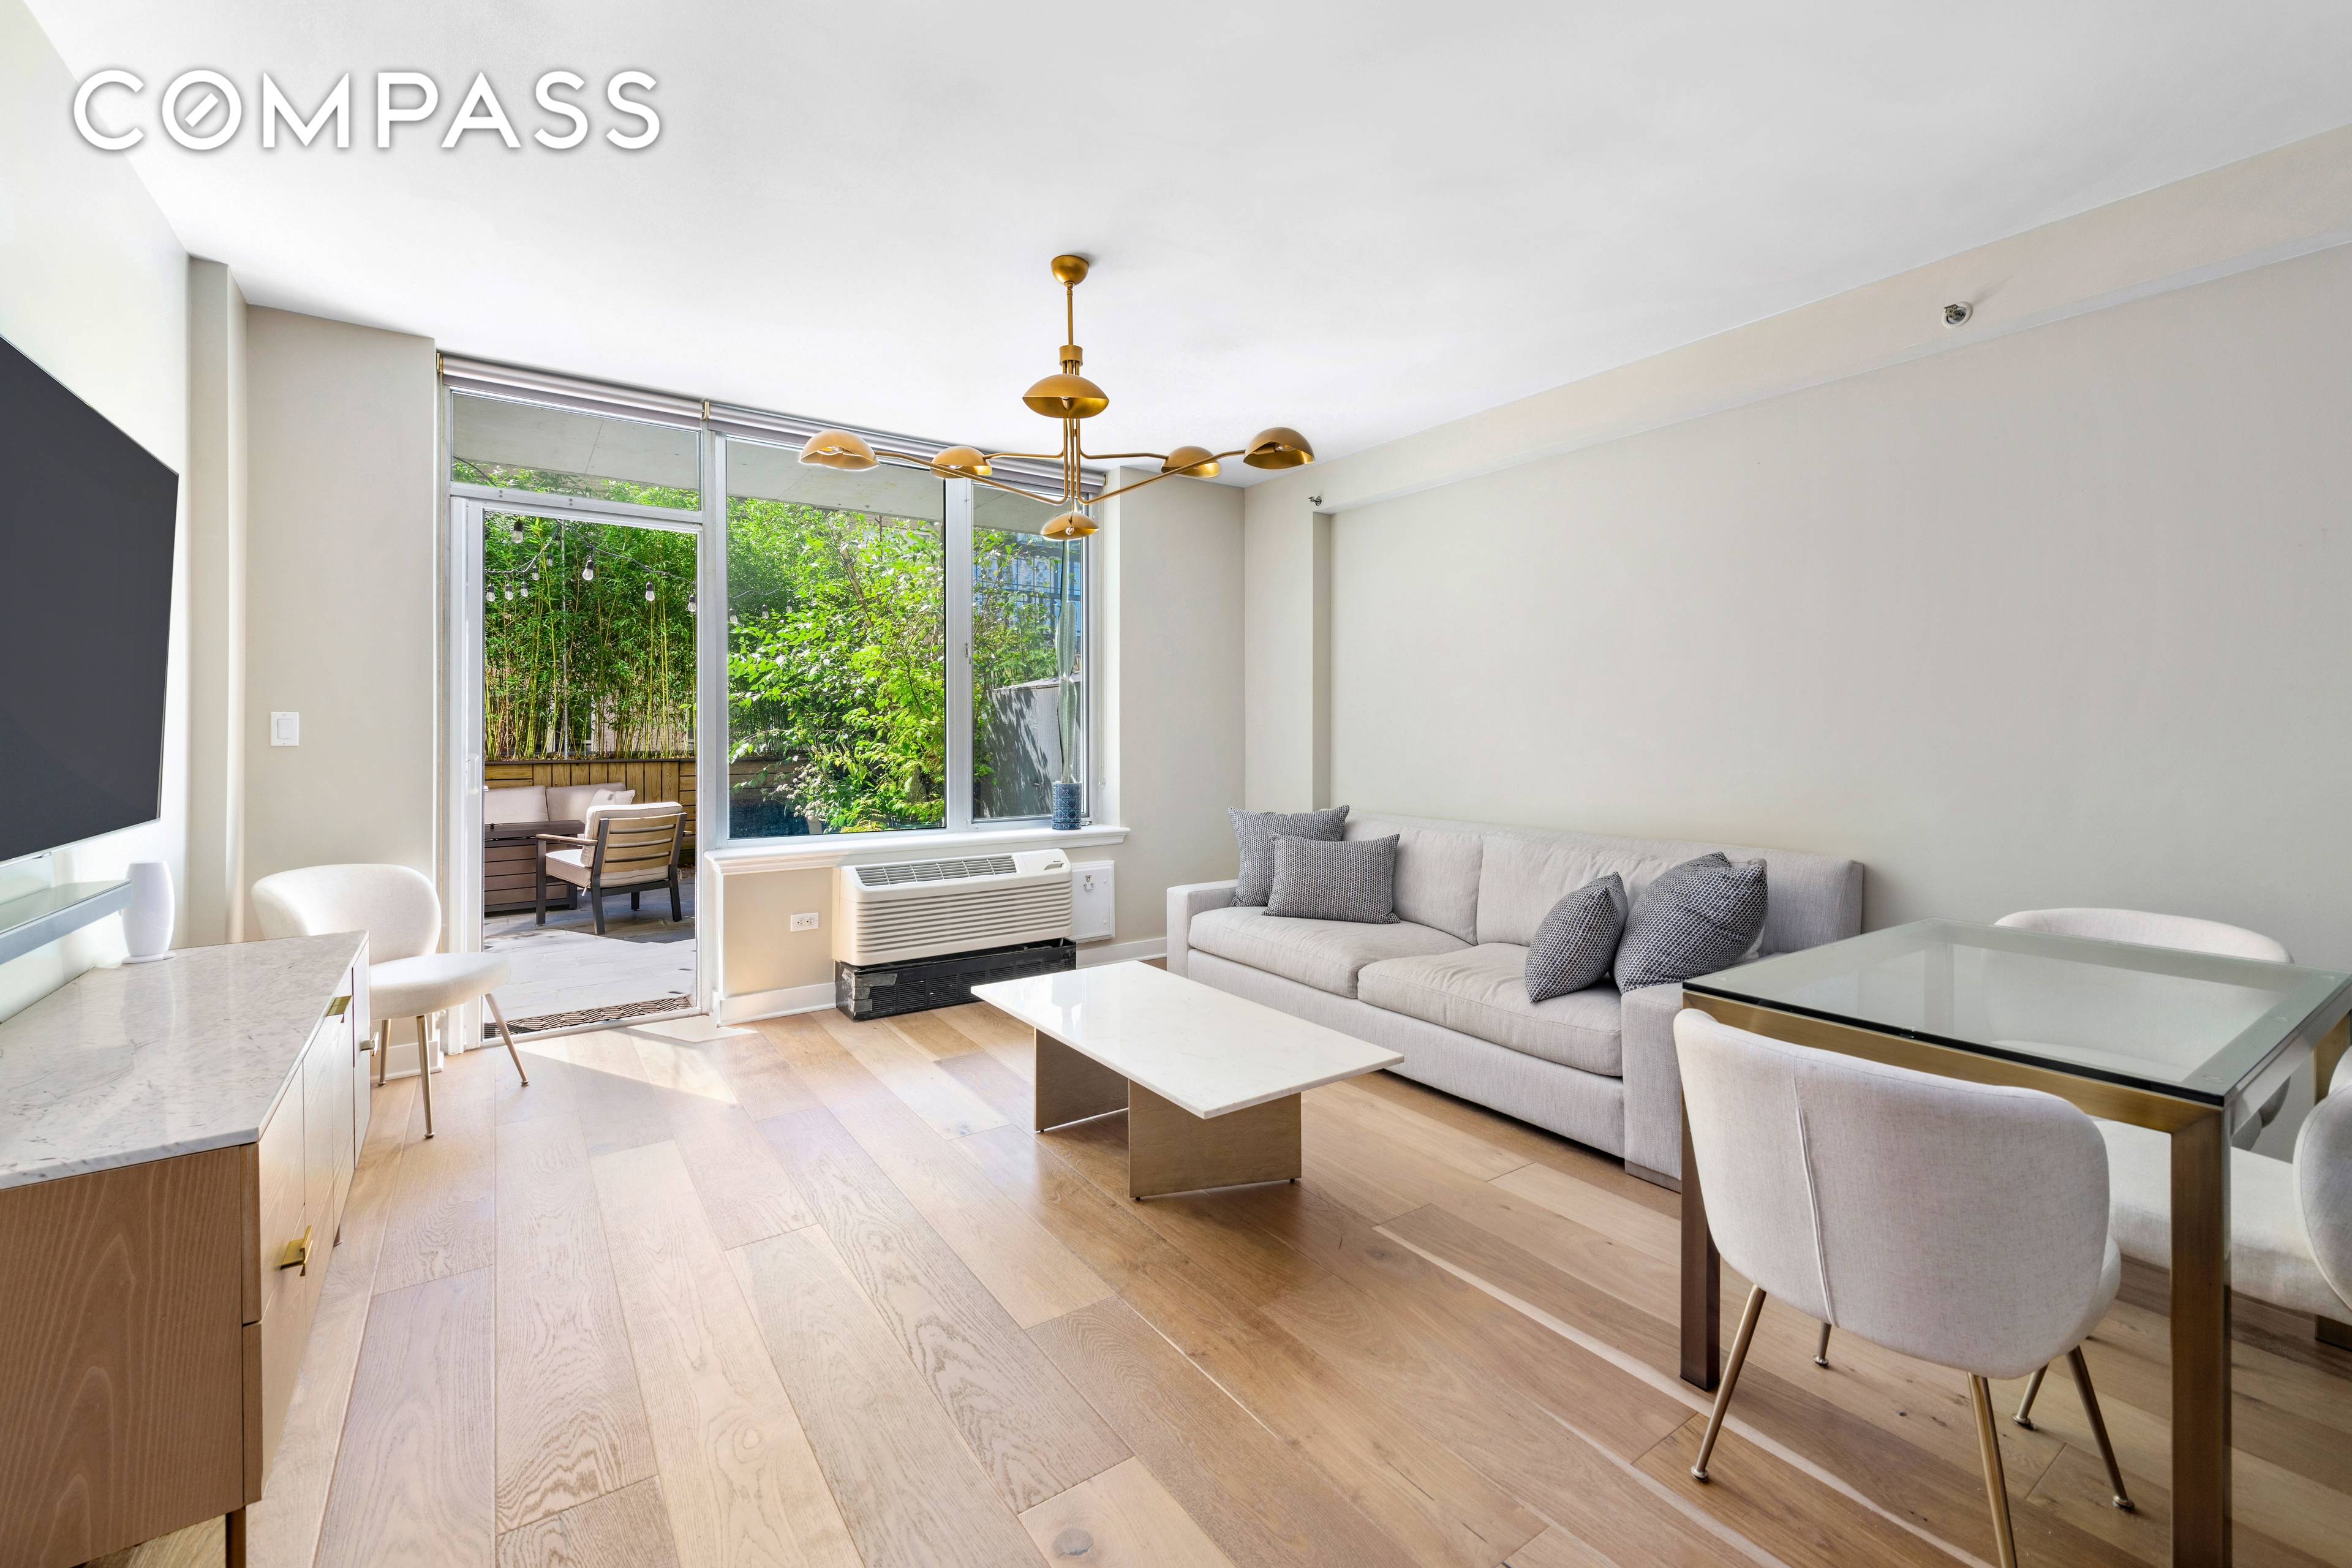 Welcome home to this rarely available beautiful sun filled one bedroom apartment with a private 540 sqft terrace, storage and parking spot in prime South Williamsburg.